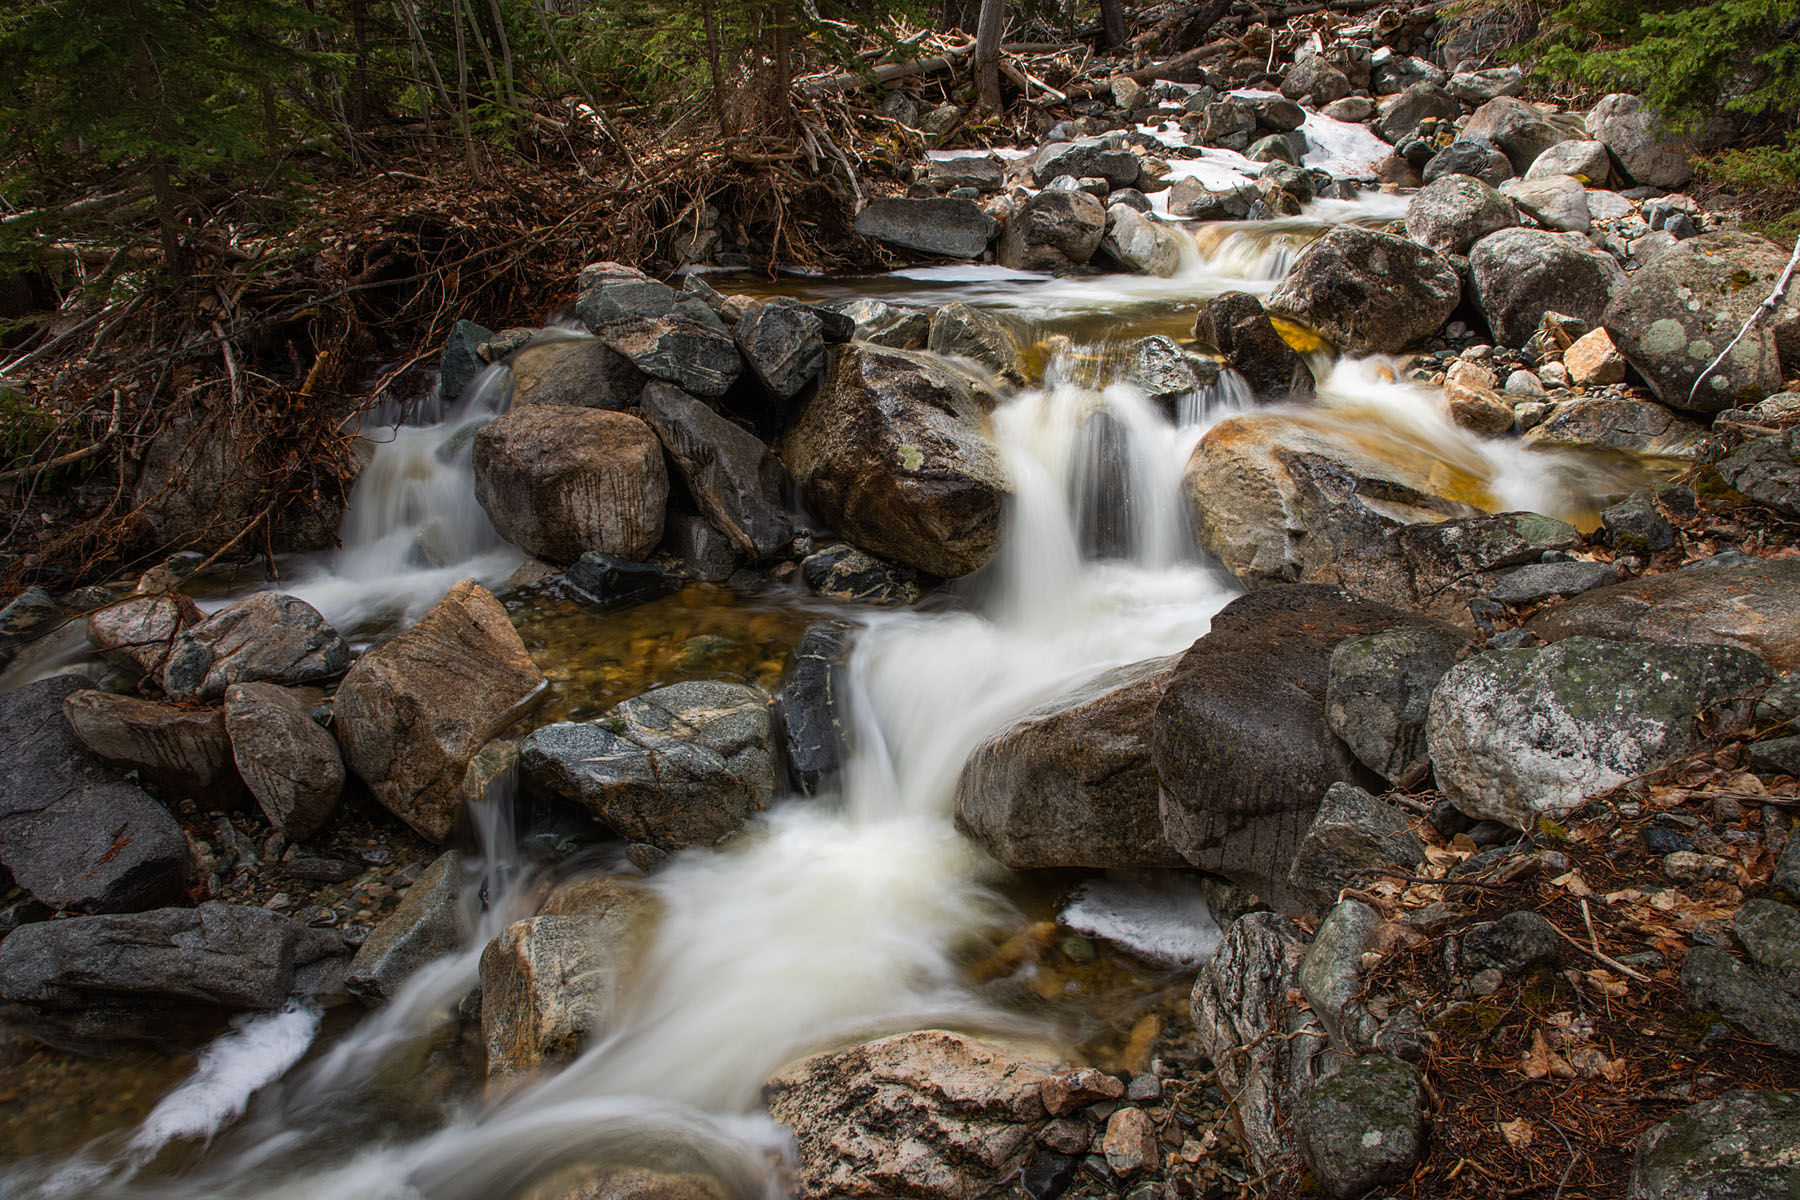 Snow Creek in the national forest,.  Polarizer filter, exposure 1/2 second.  Click for next photo.